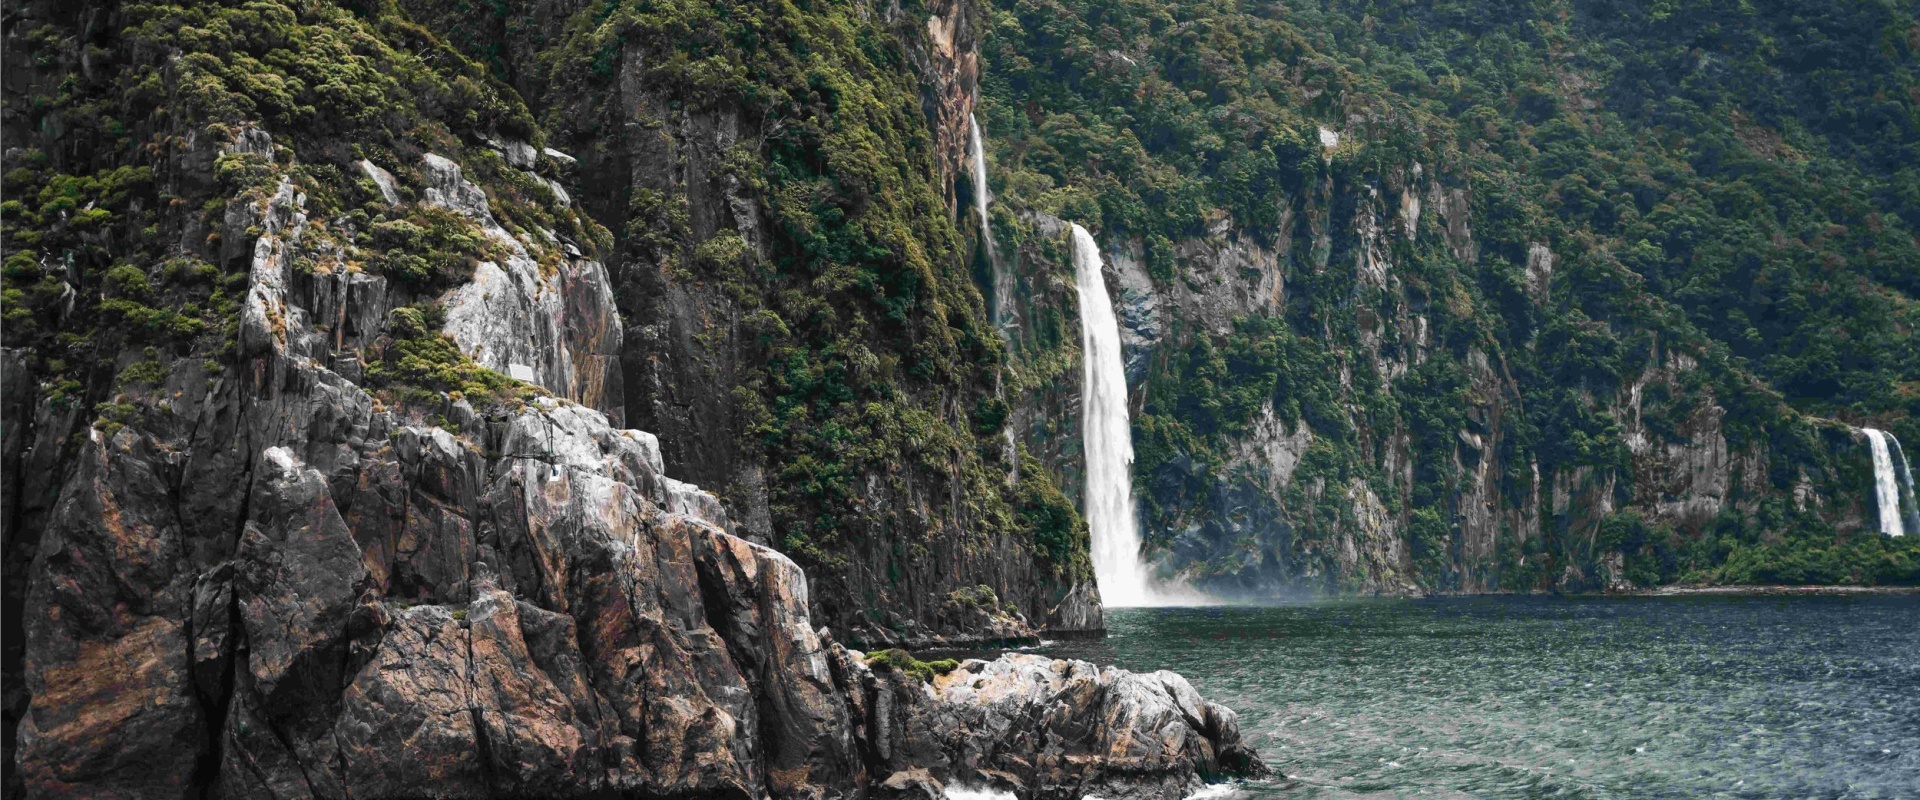 Waterfalls cascade into the fiord from cliffs green with trees and lush vegetation